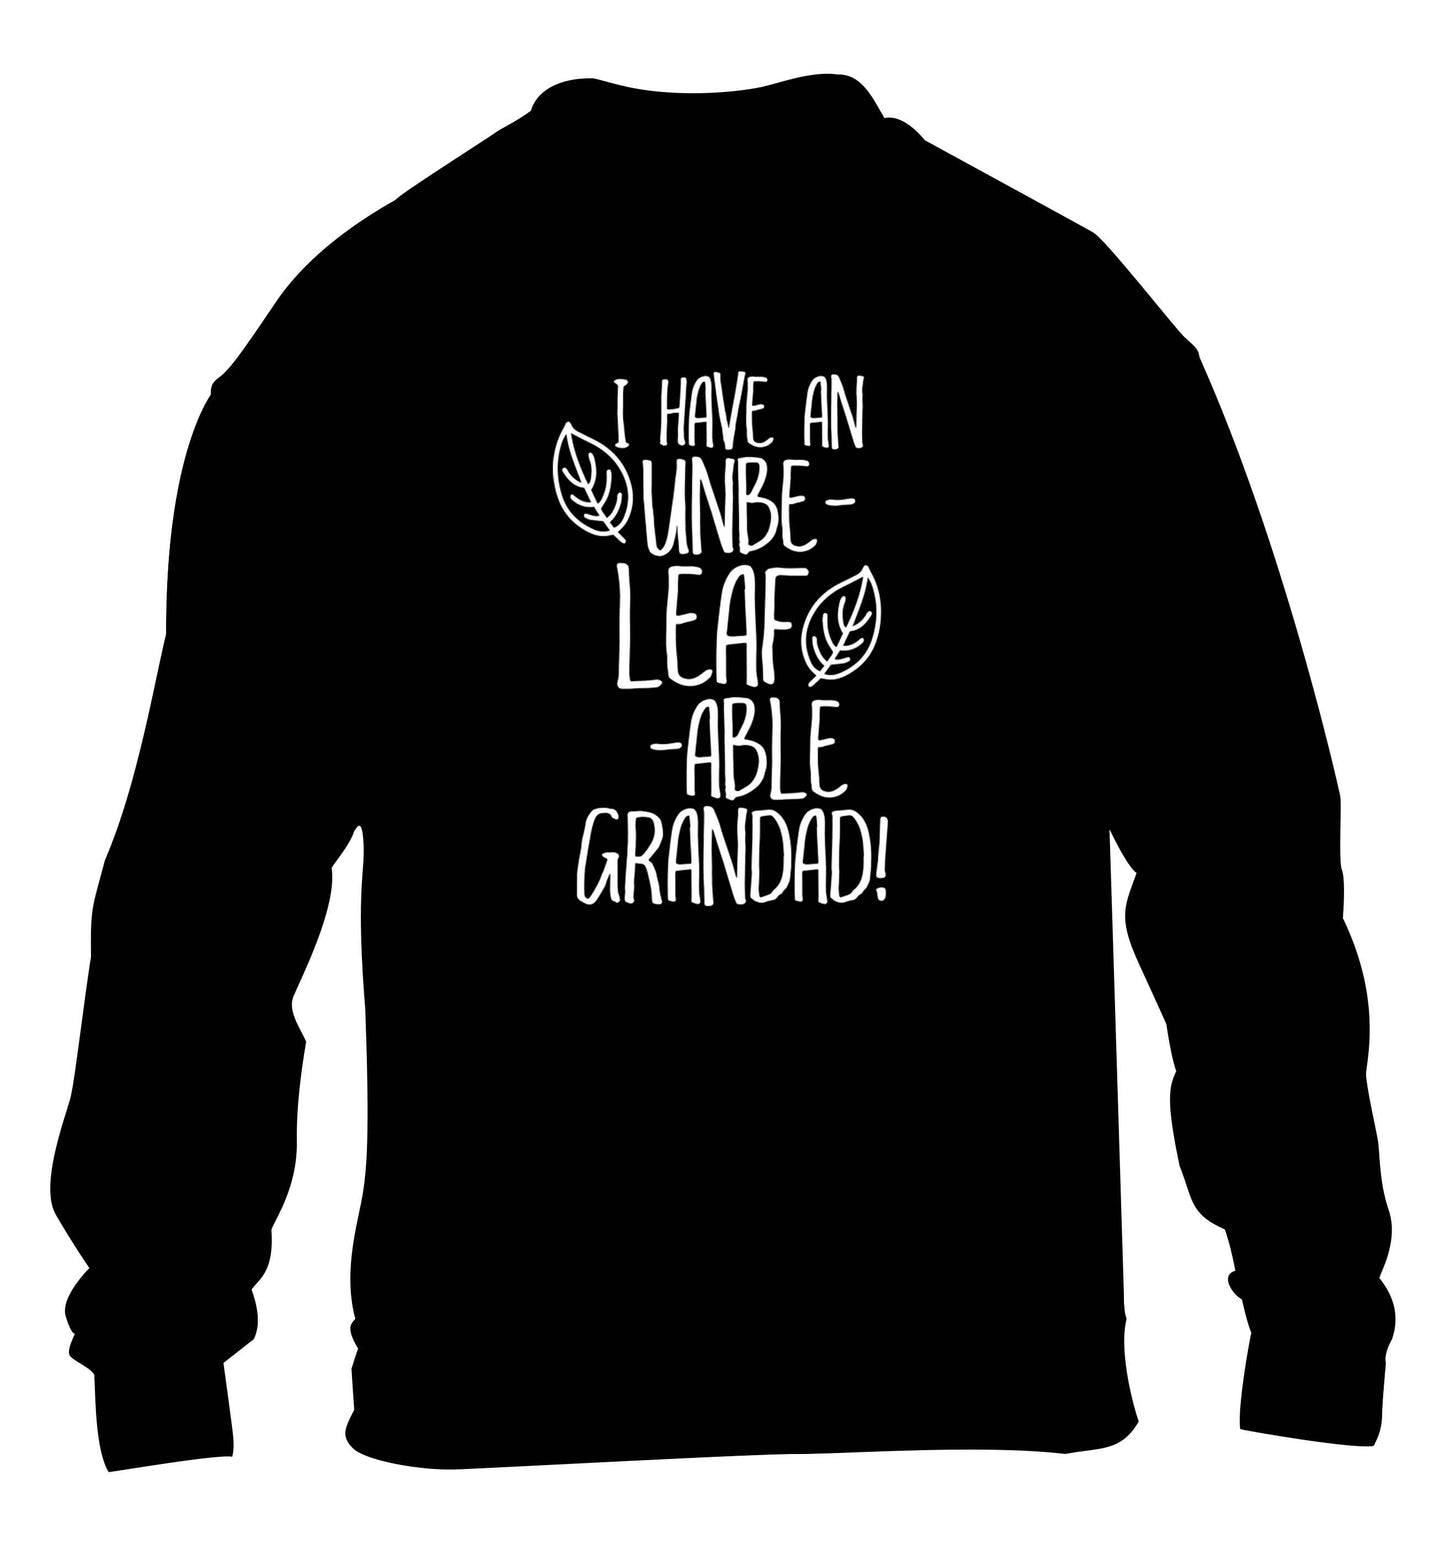 I have an unbe-leaf-able grandad children's black sweater 12-13 Years